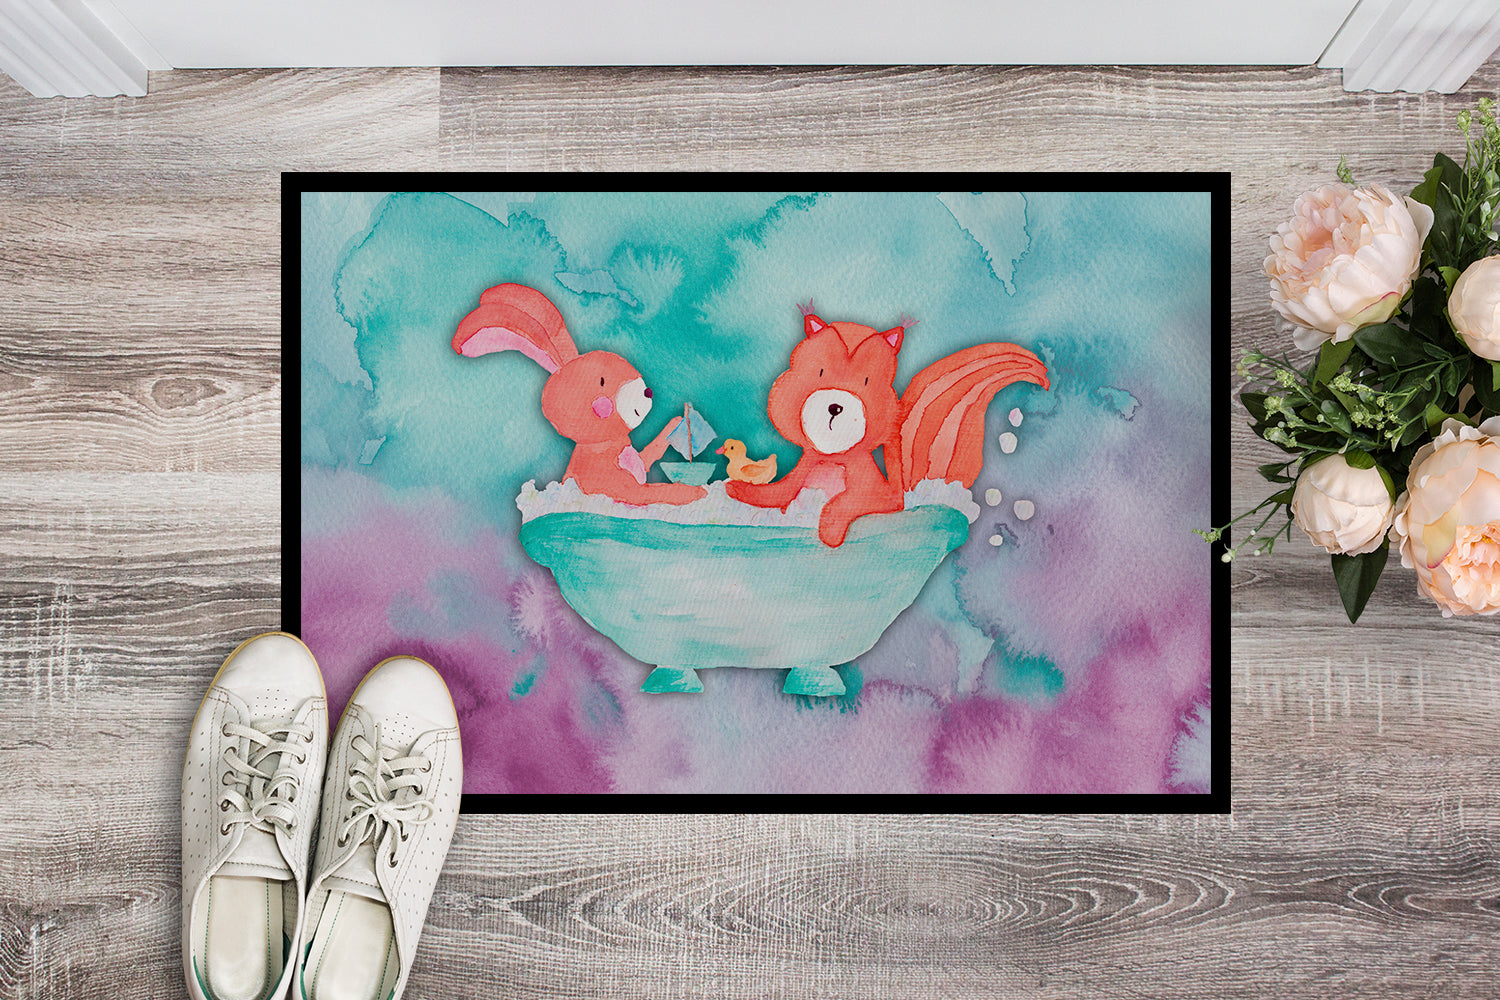 Rabbit and Squirrel Bathing Watercolor Indoor or Outdoor Mat 18x27 BB7348MAT - the-store.com